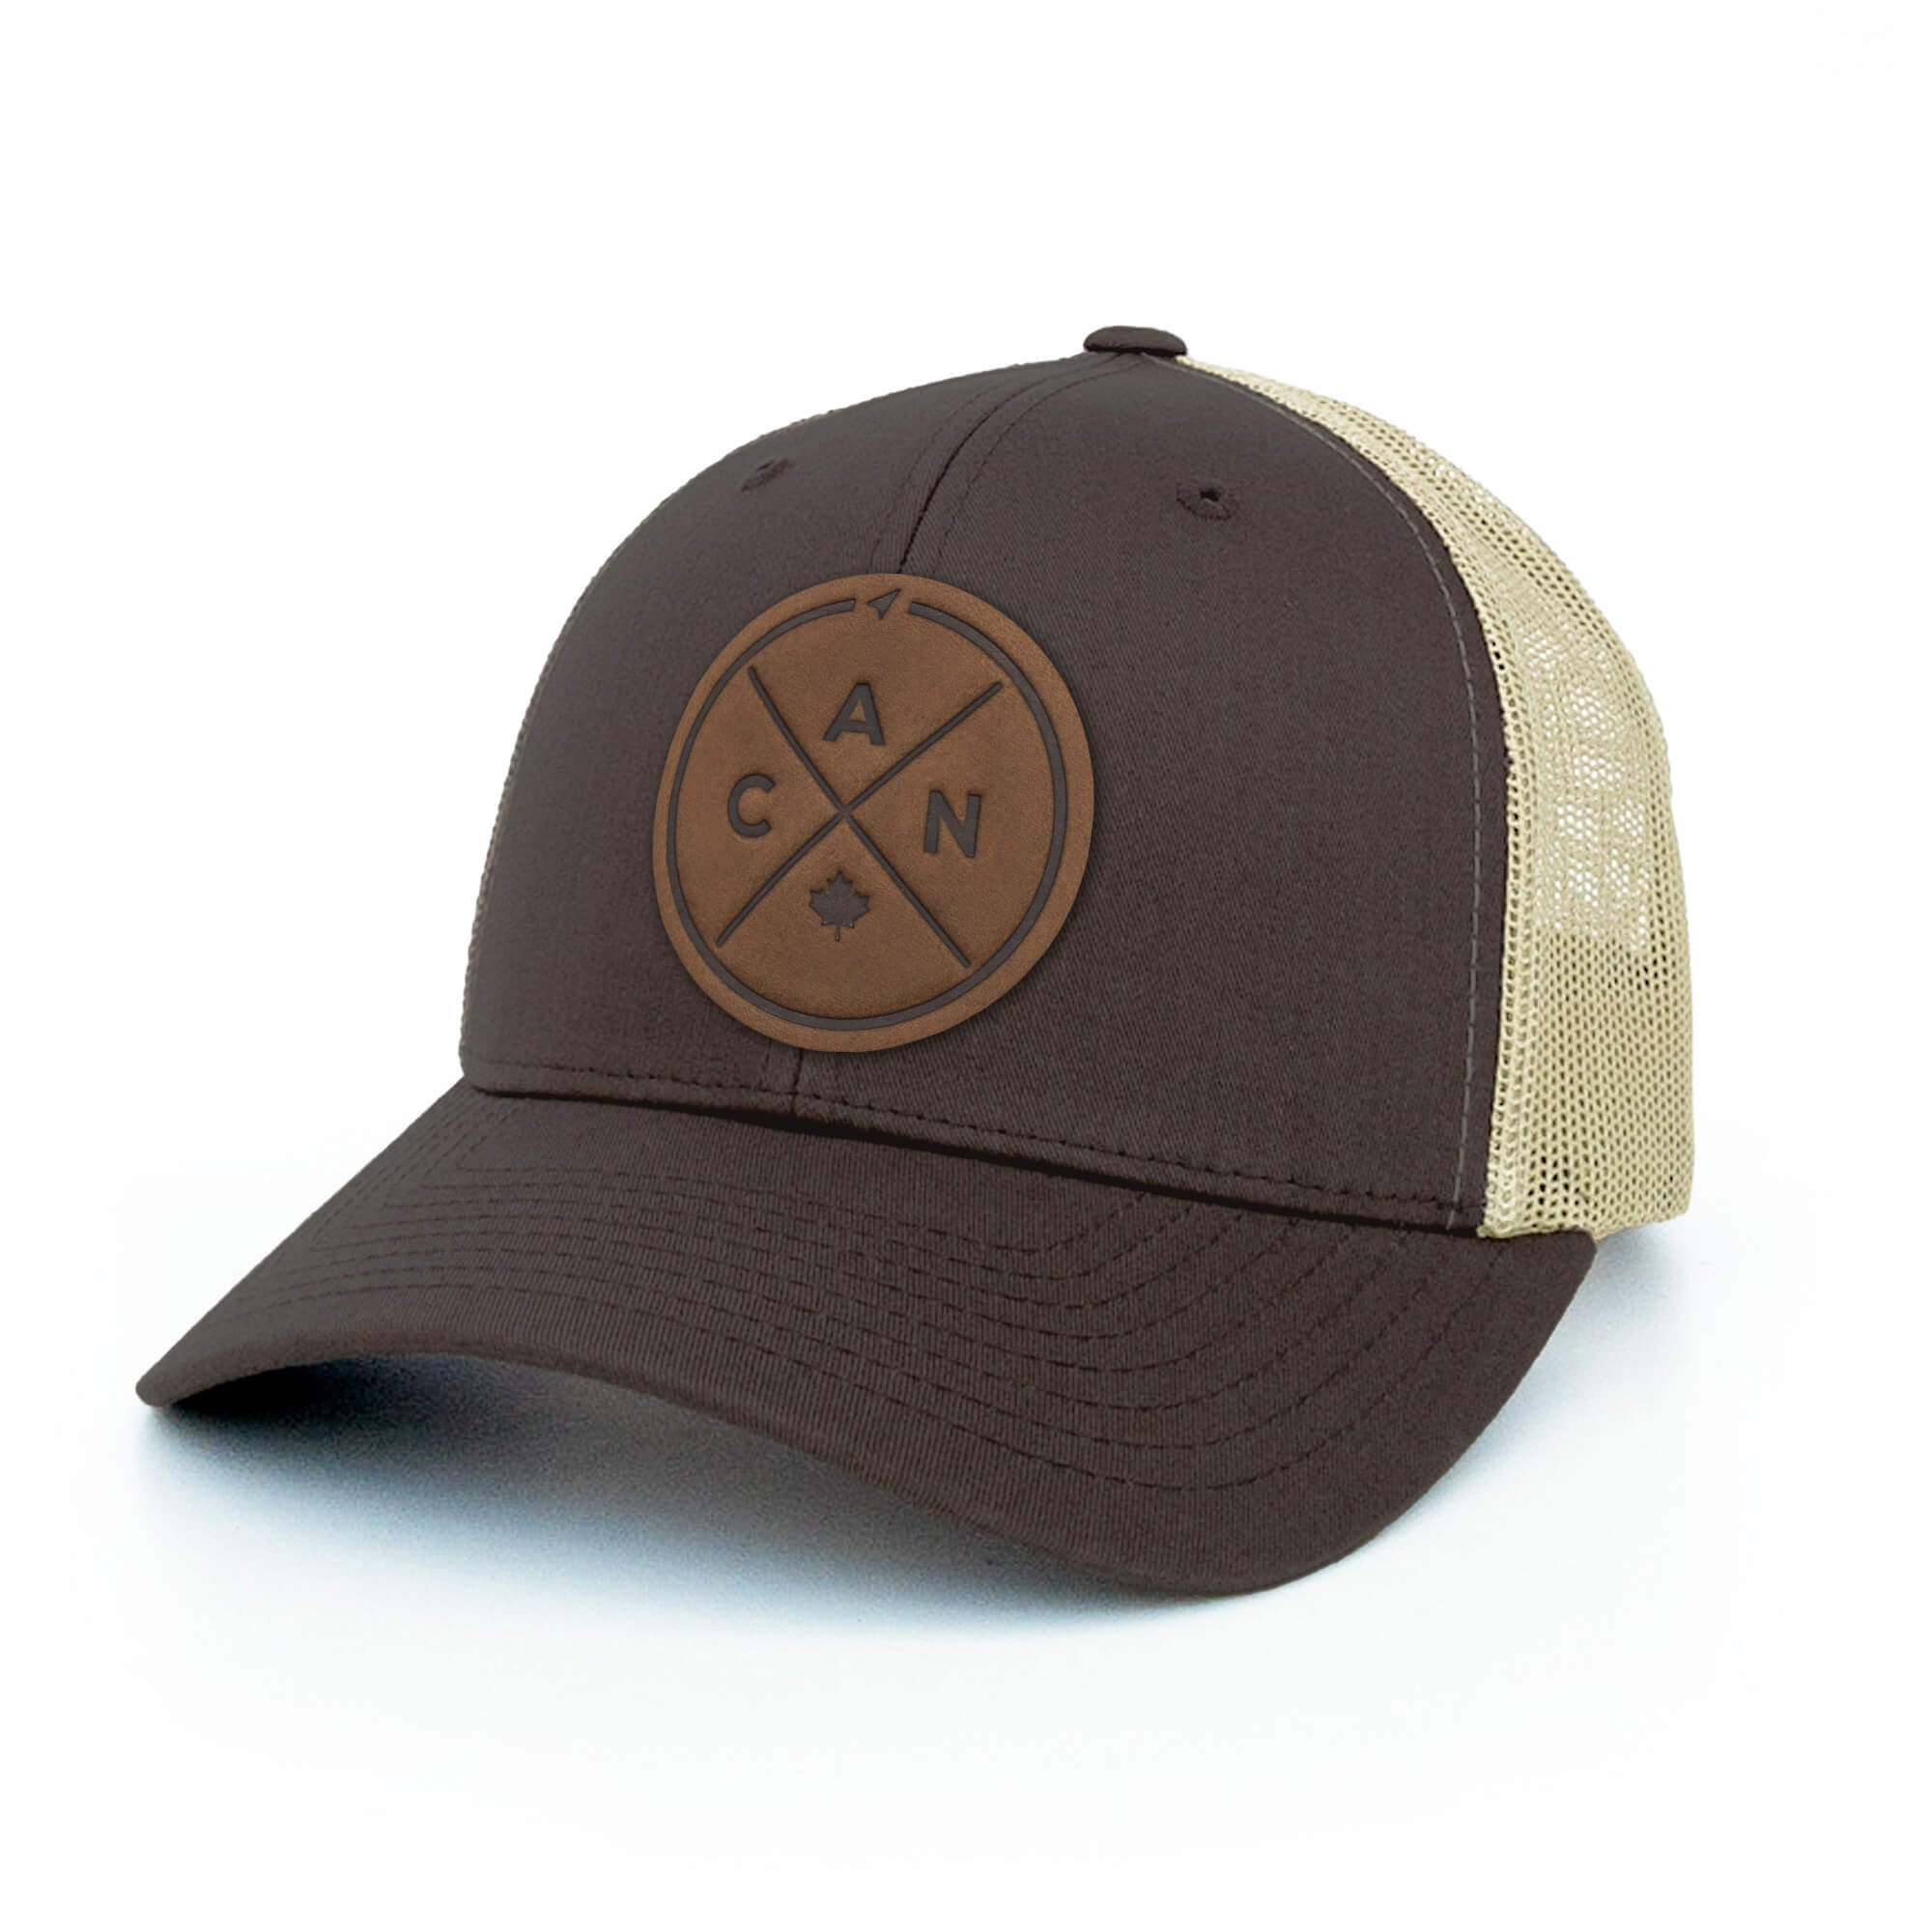 Brown and khaki trucker hat with full-grain leather patch of Canada Compass | BLACK-002-011, CHARC-002-011, NAVY-002-011, HGREY-002-011, MOSS-002-011, BROWN-002-011, RED-002-011